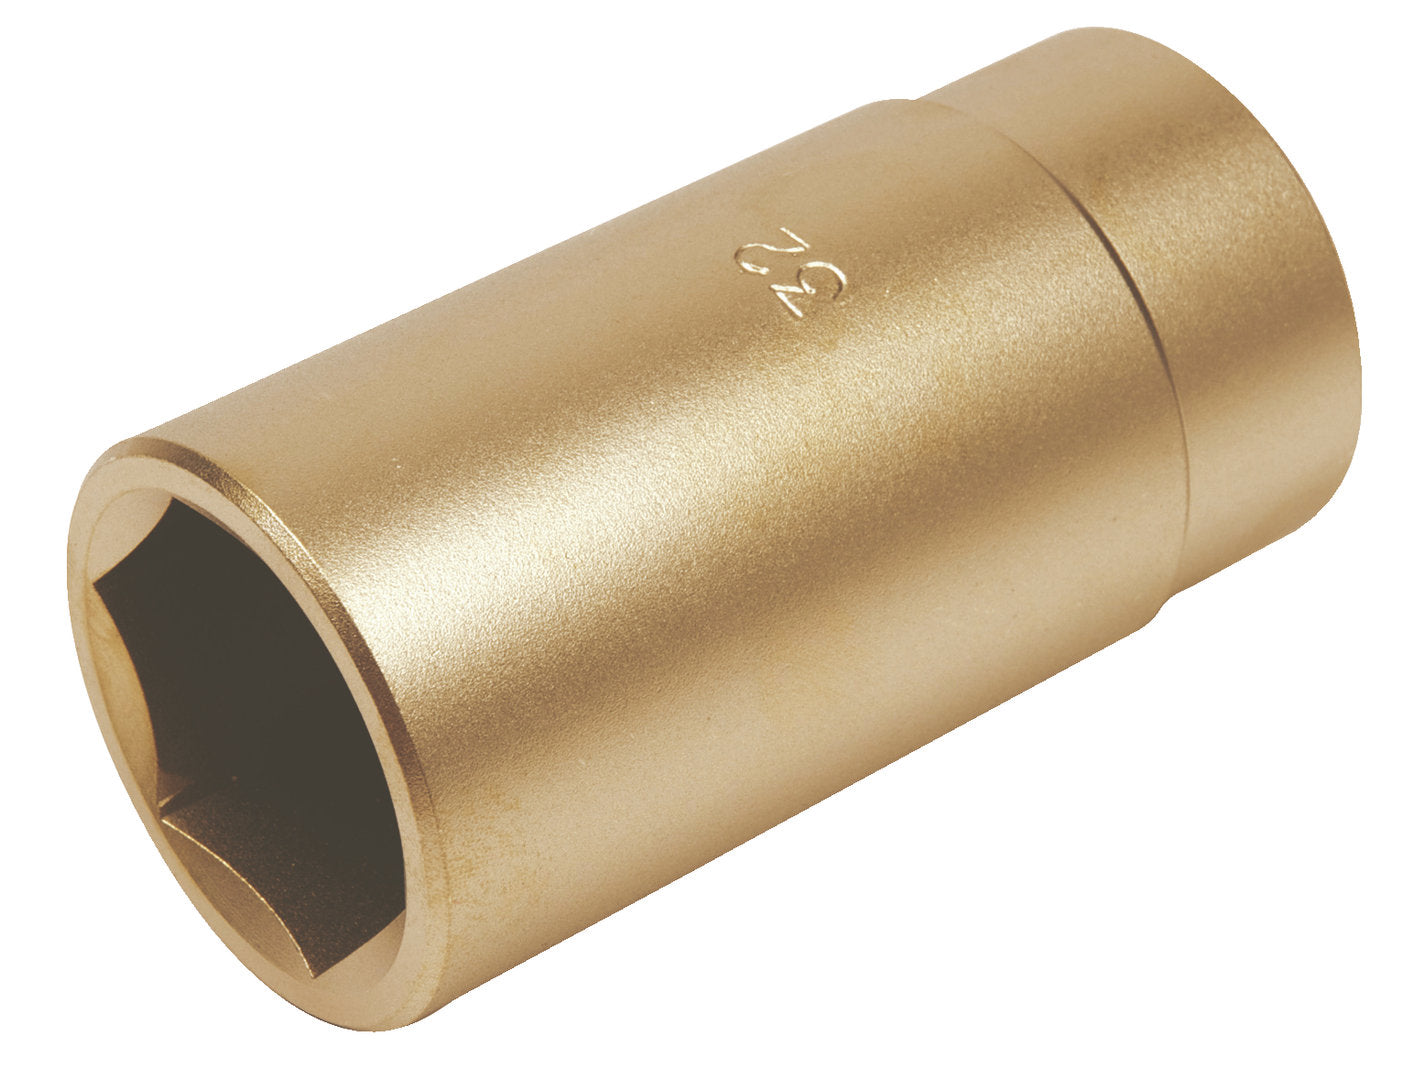 GEDORE GED0350001S - 1/2" hex socket, length 10mm (2524007)